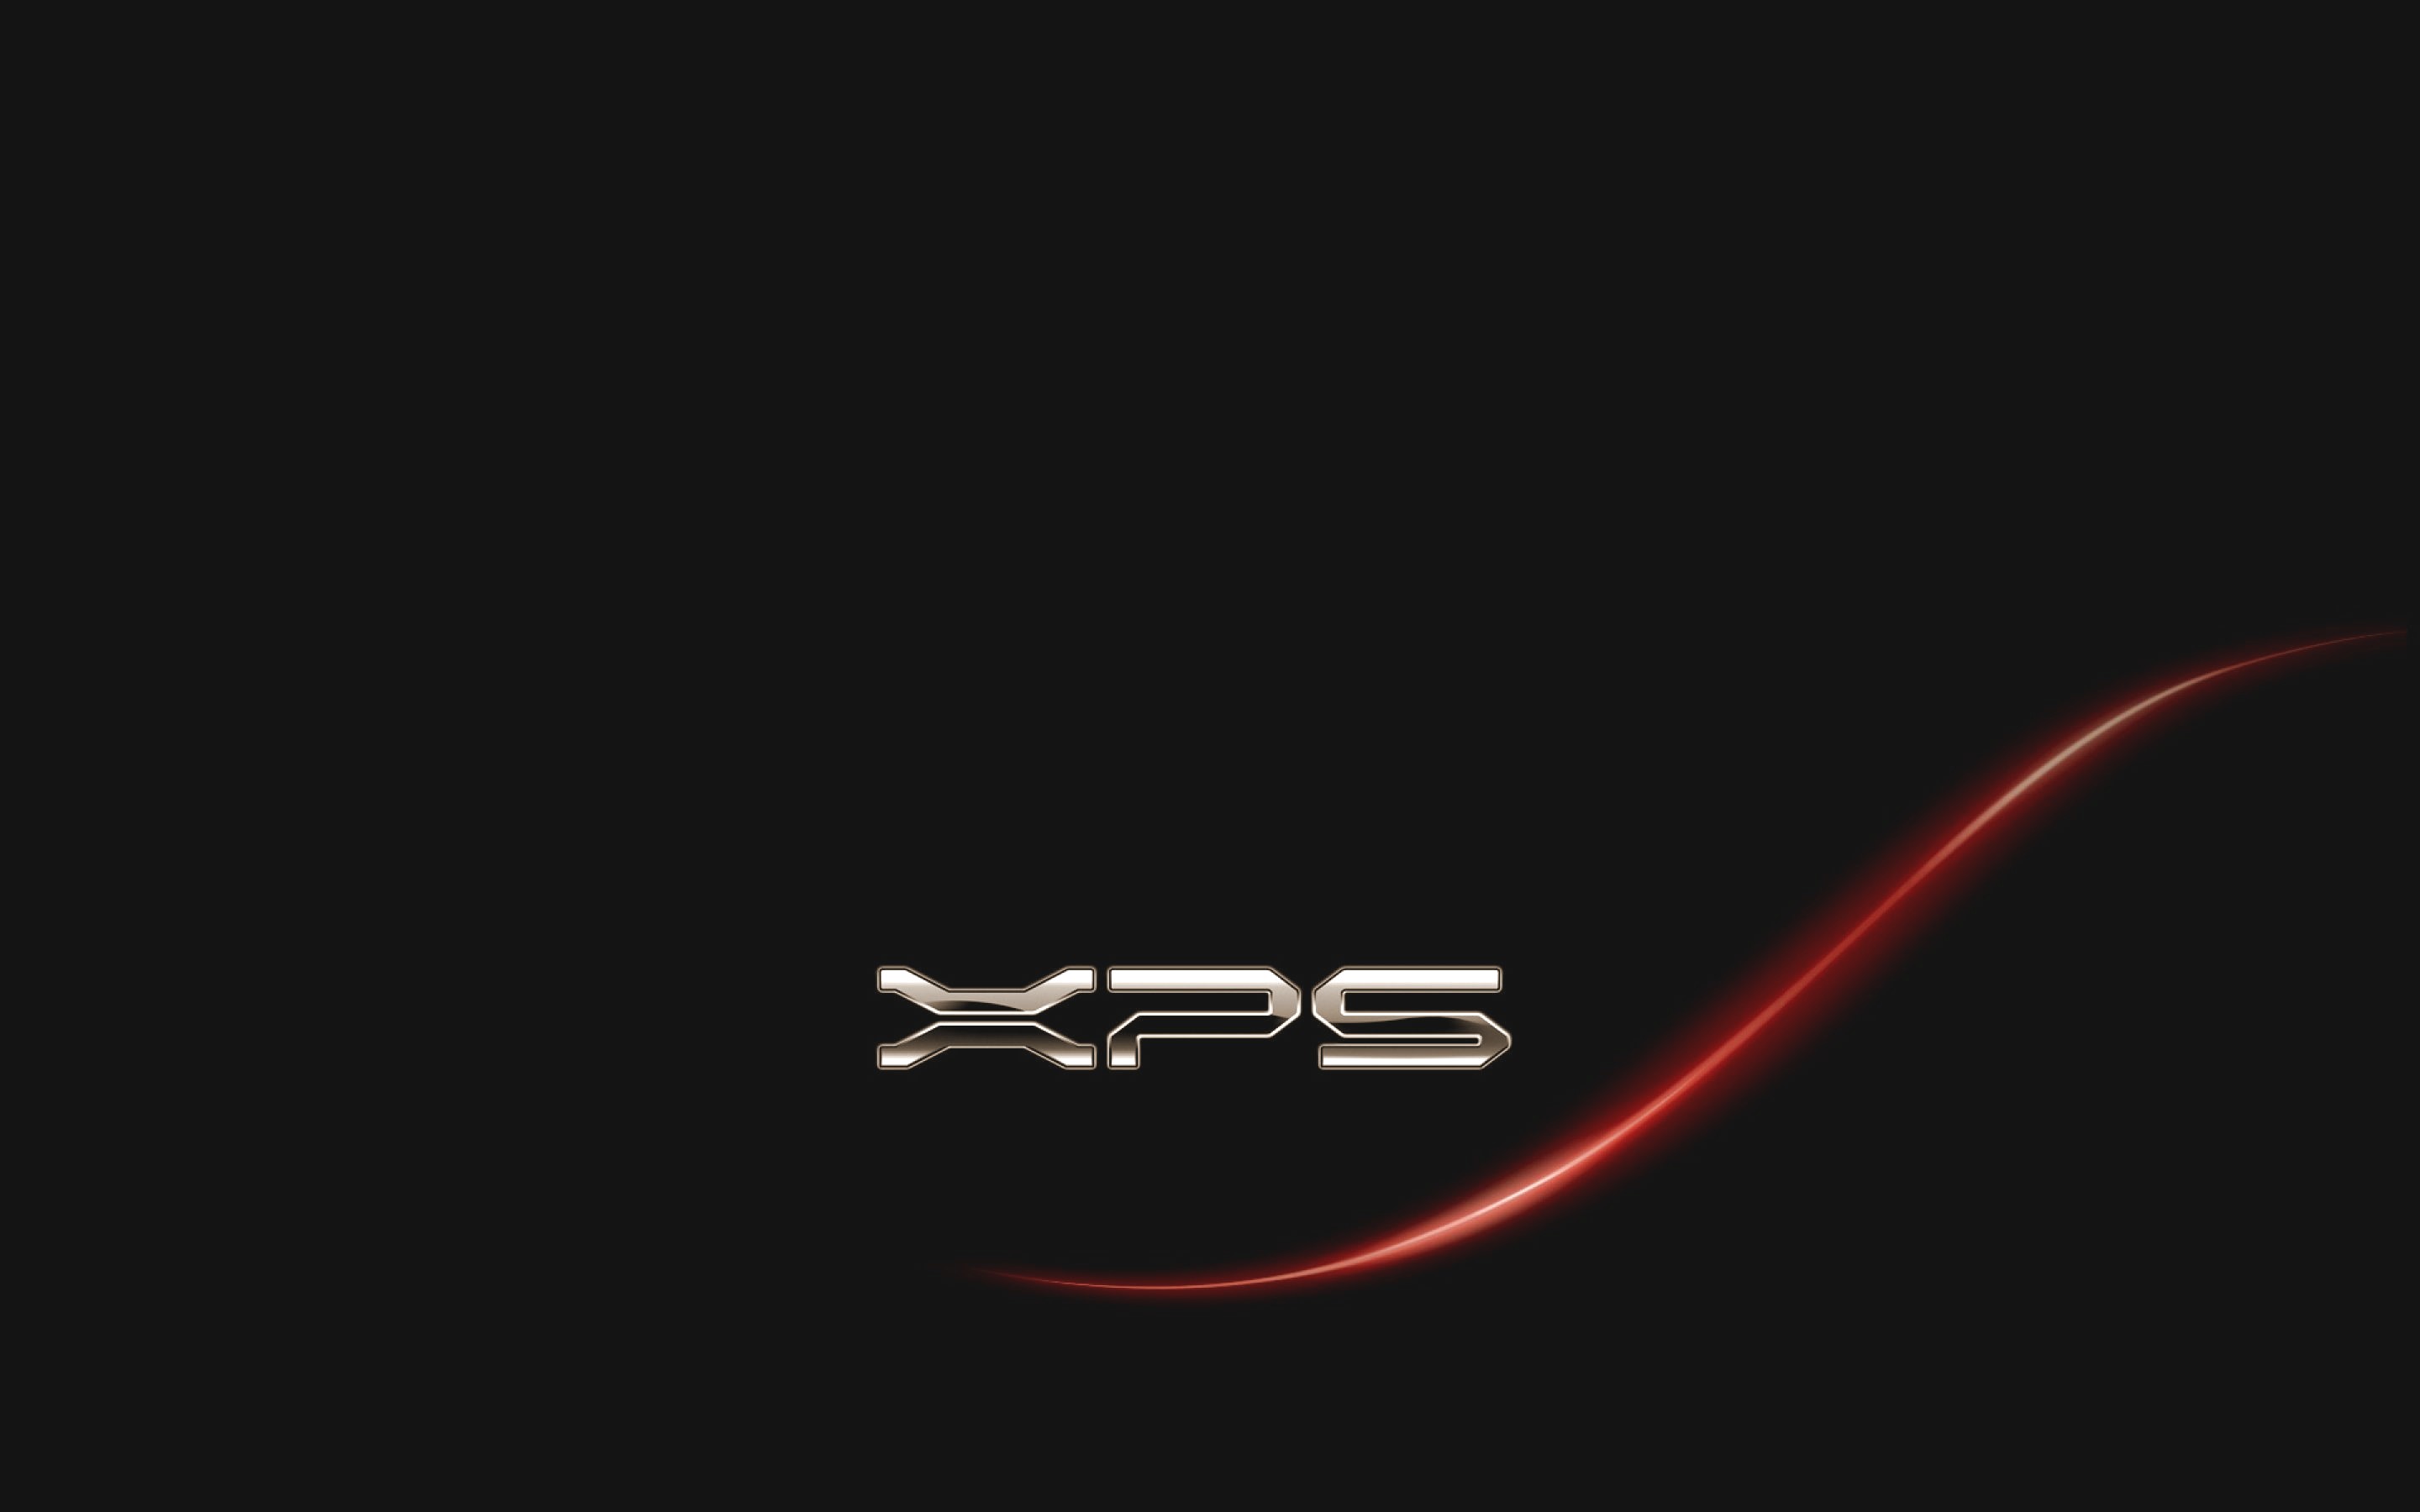 Wallpaper For Dell Xps On